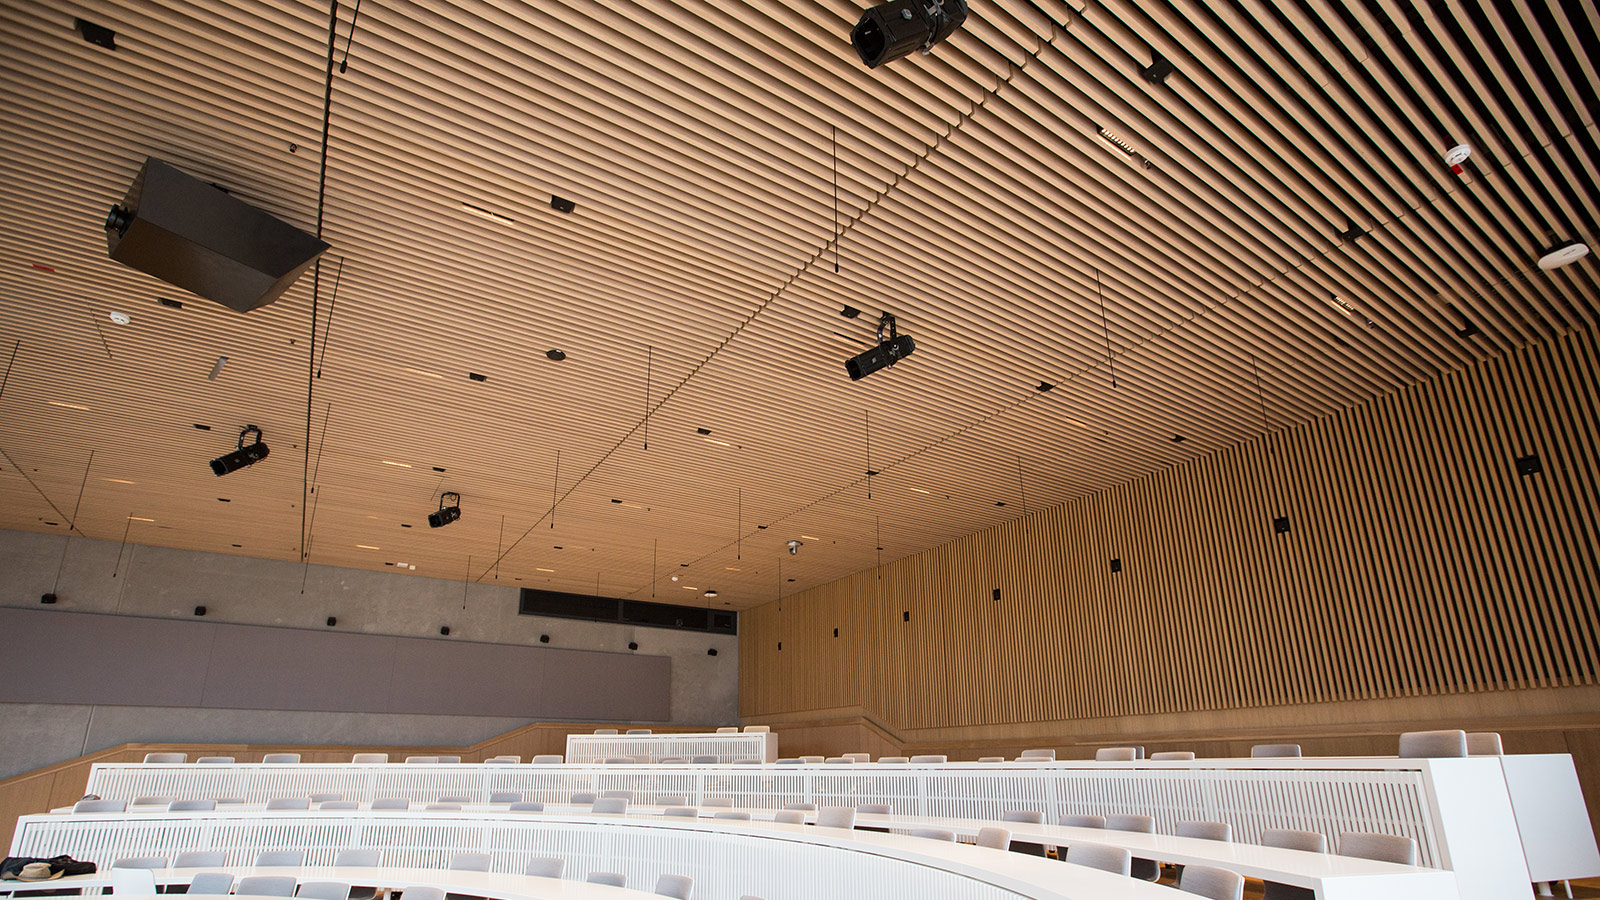 The A.P. Møller Foundation Makes Sound Investment in Education with Meyer Sound Constellation Acoustic System